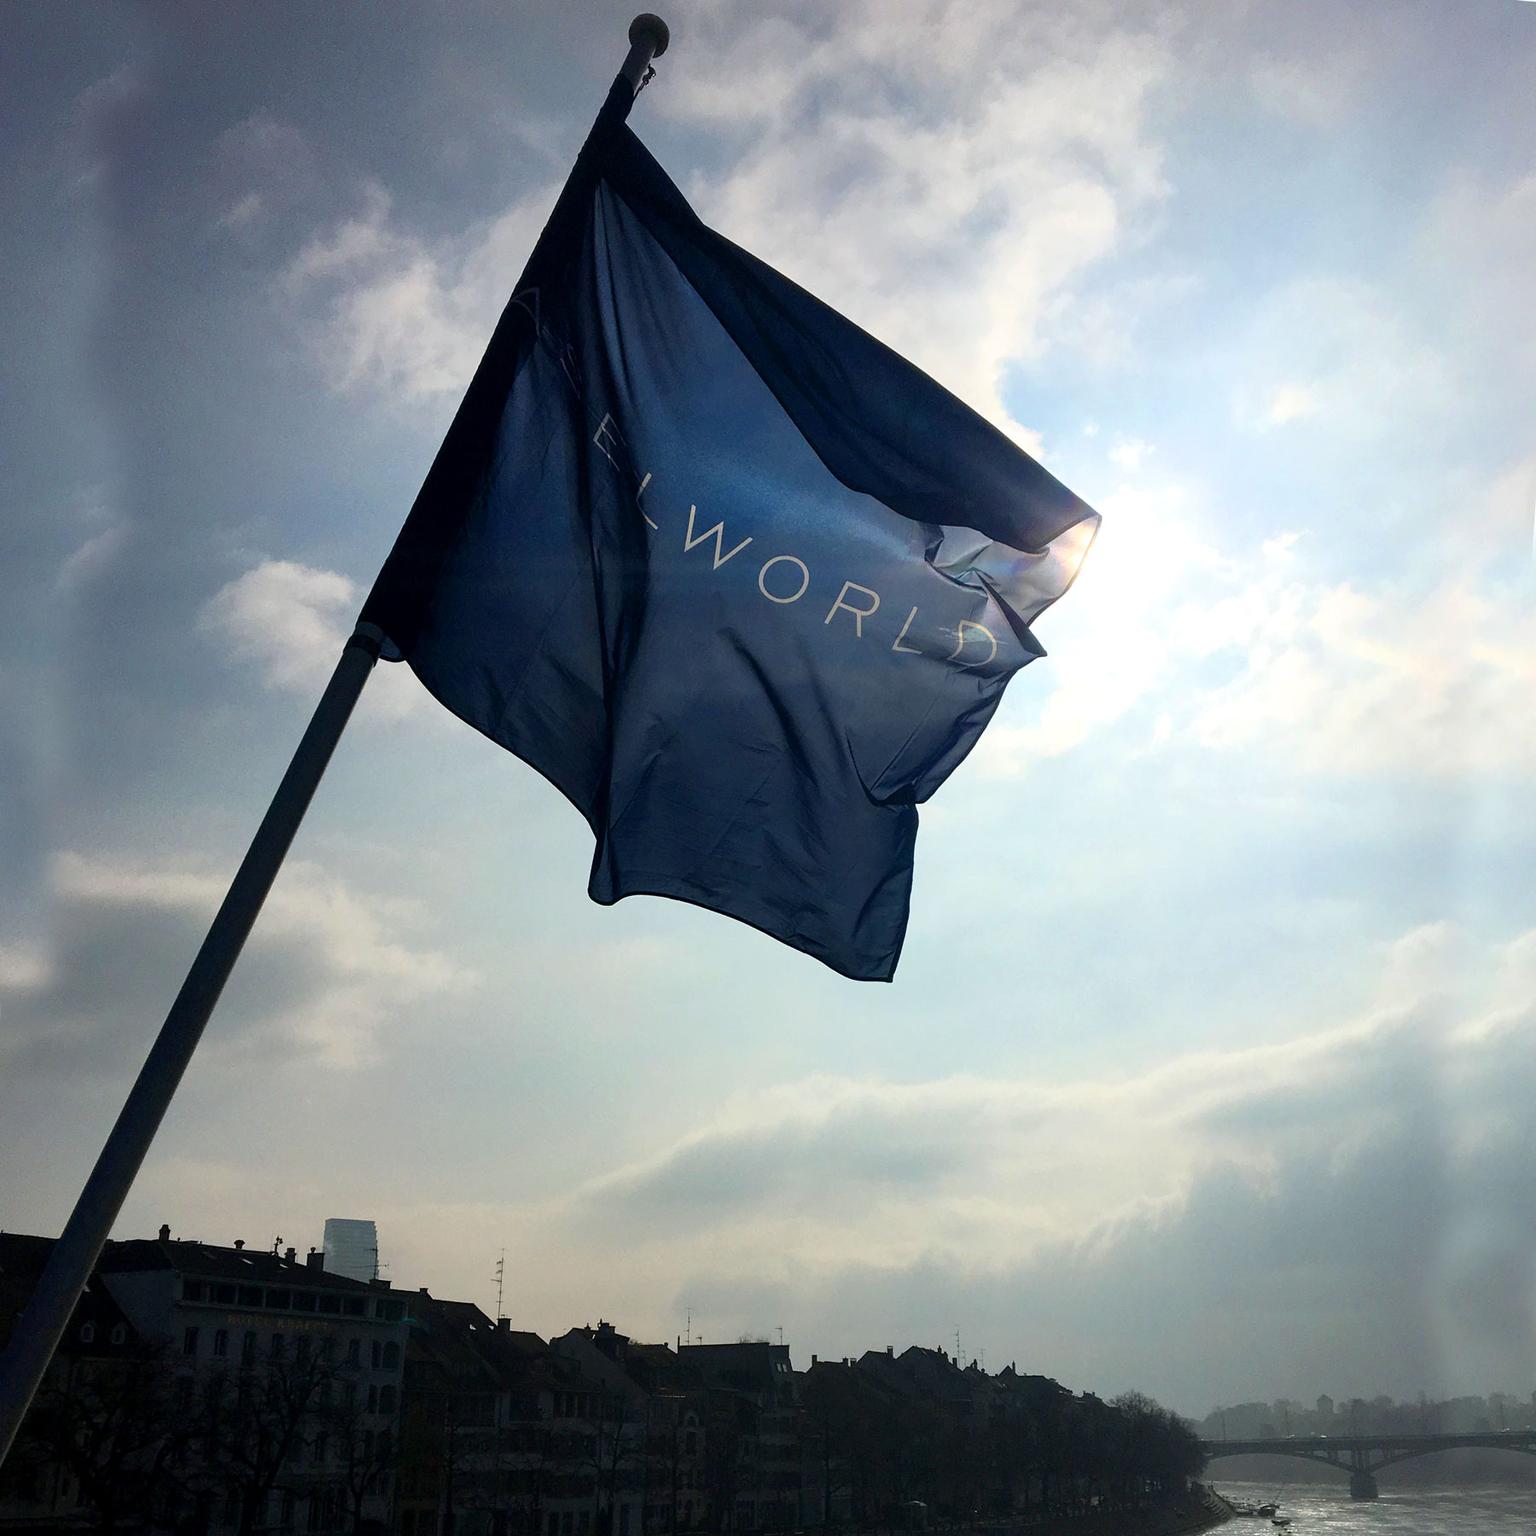 City of Basel with the Baselworld flag